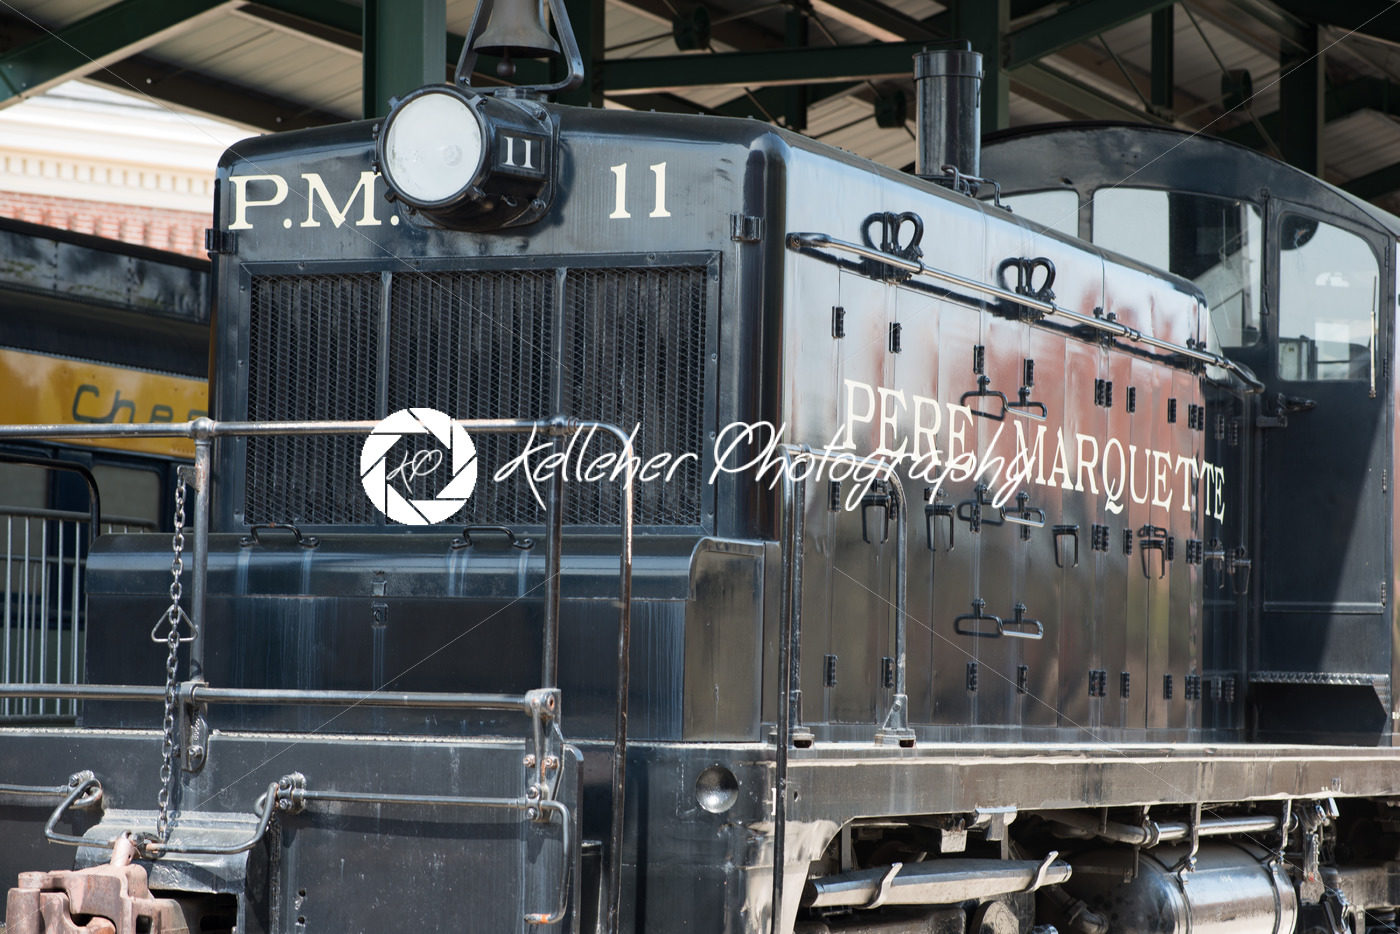 BALITMORE, MD – APRIL 15: PM No.11 Pere Marquette Railway GM-EMD model SW-1 on April 15, 2017 - Kelleher Photography Store